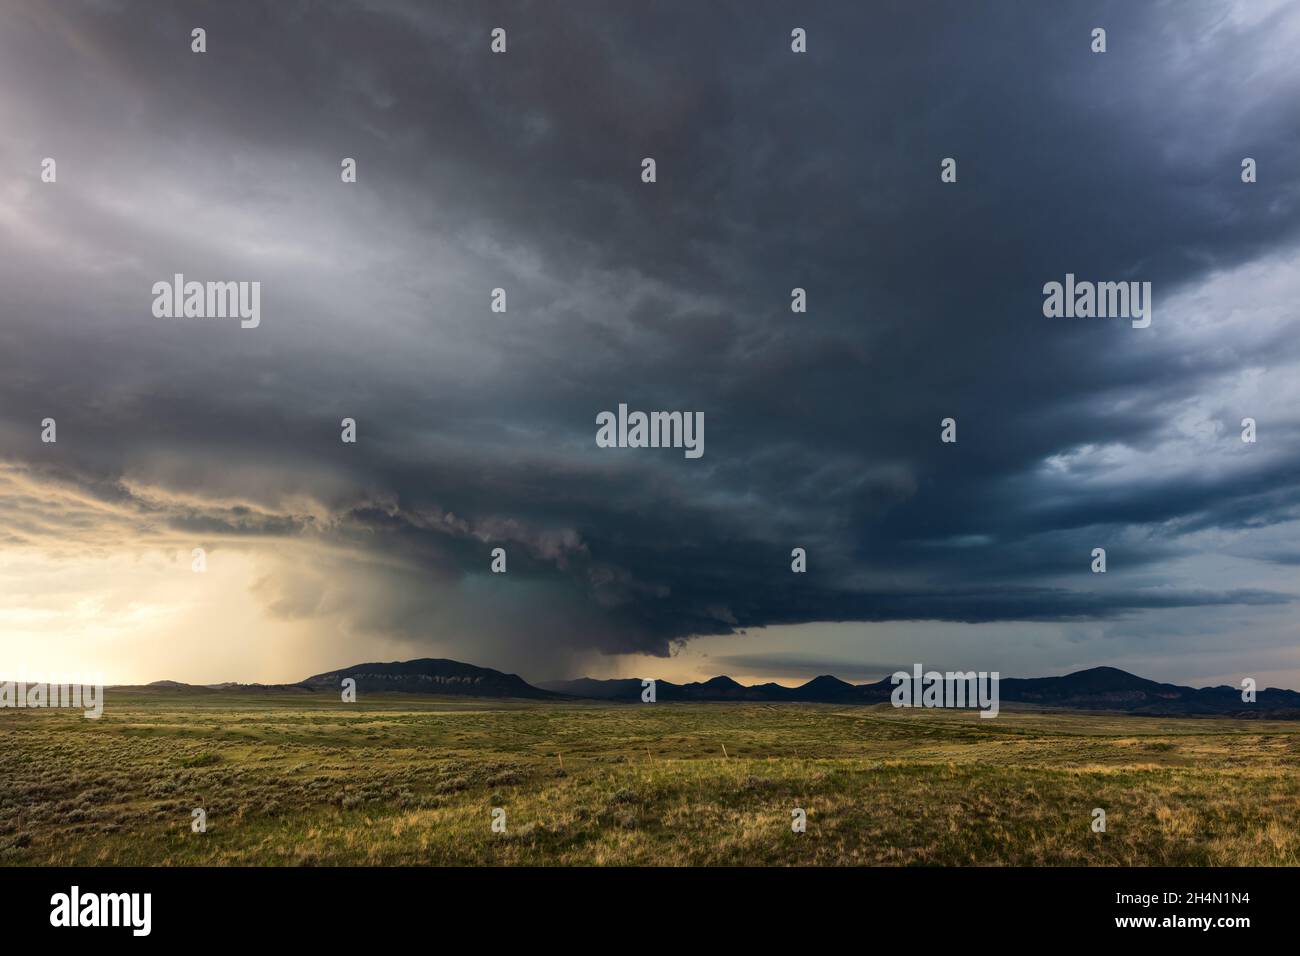 Scenic landscape with stormy sky, dramatic clouds and approaching thunderstorm near Malta, Montana Stock Photo